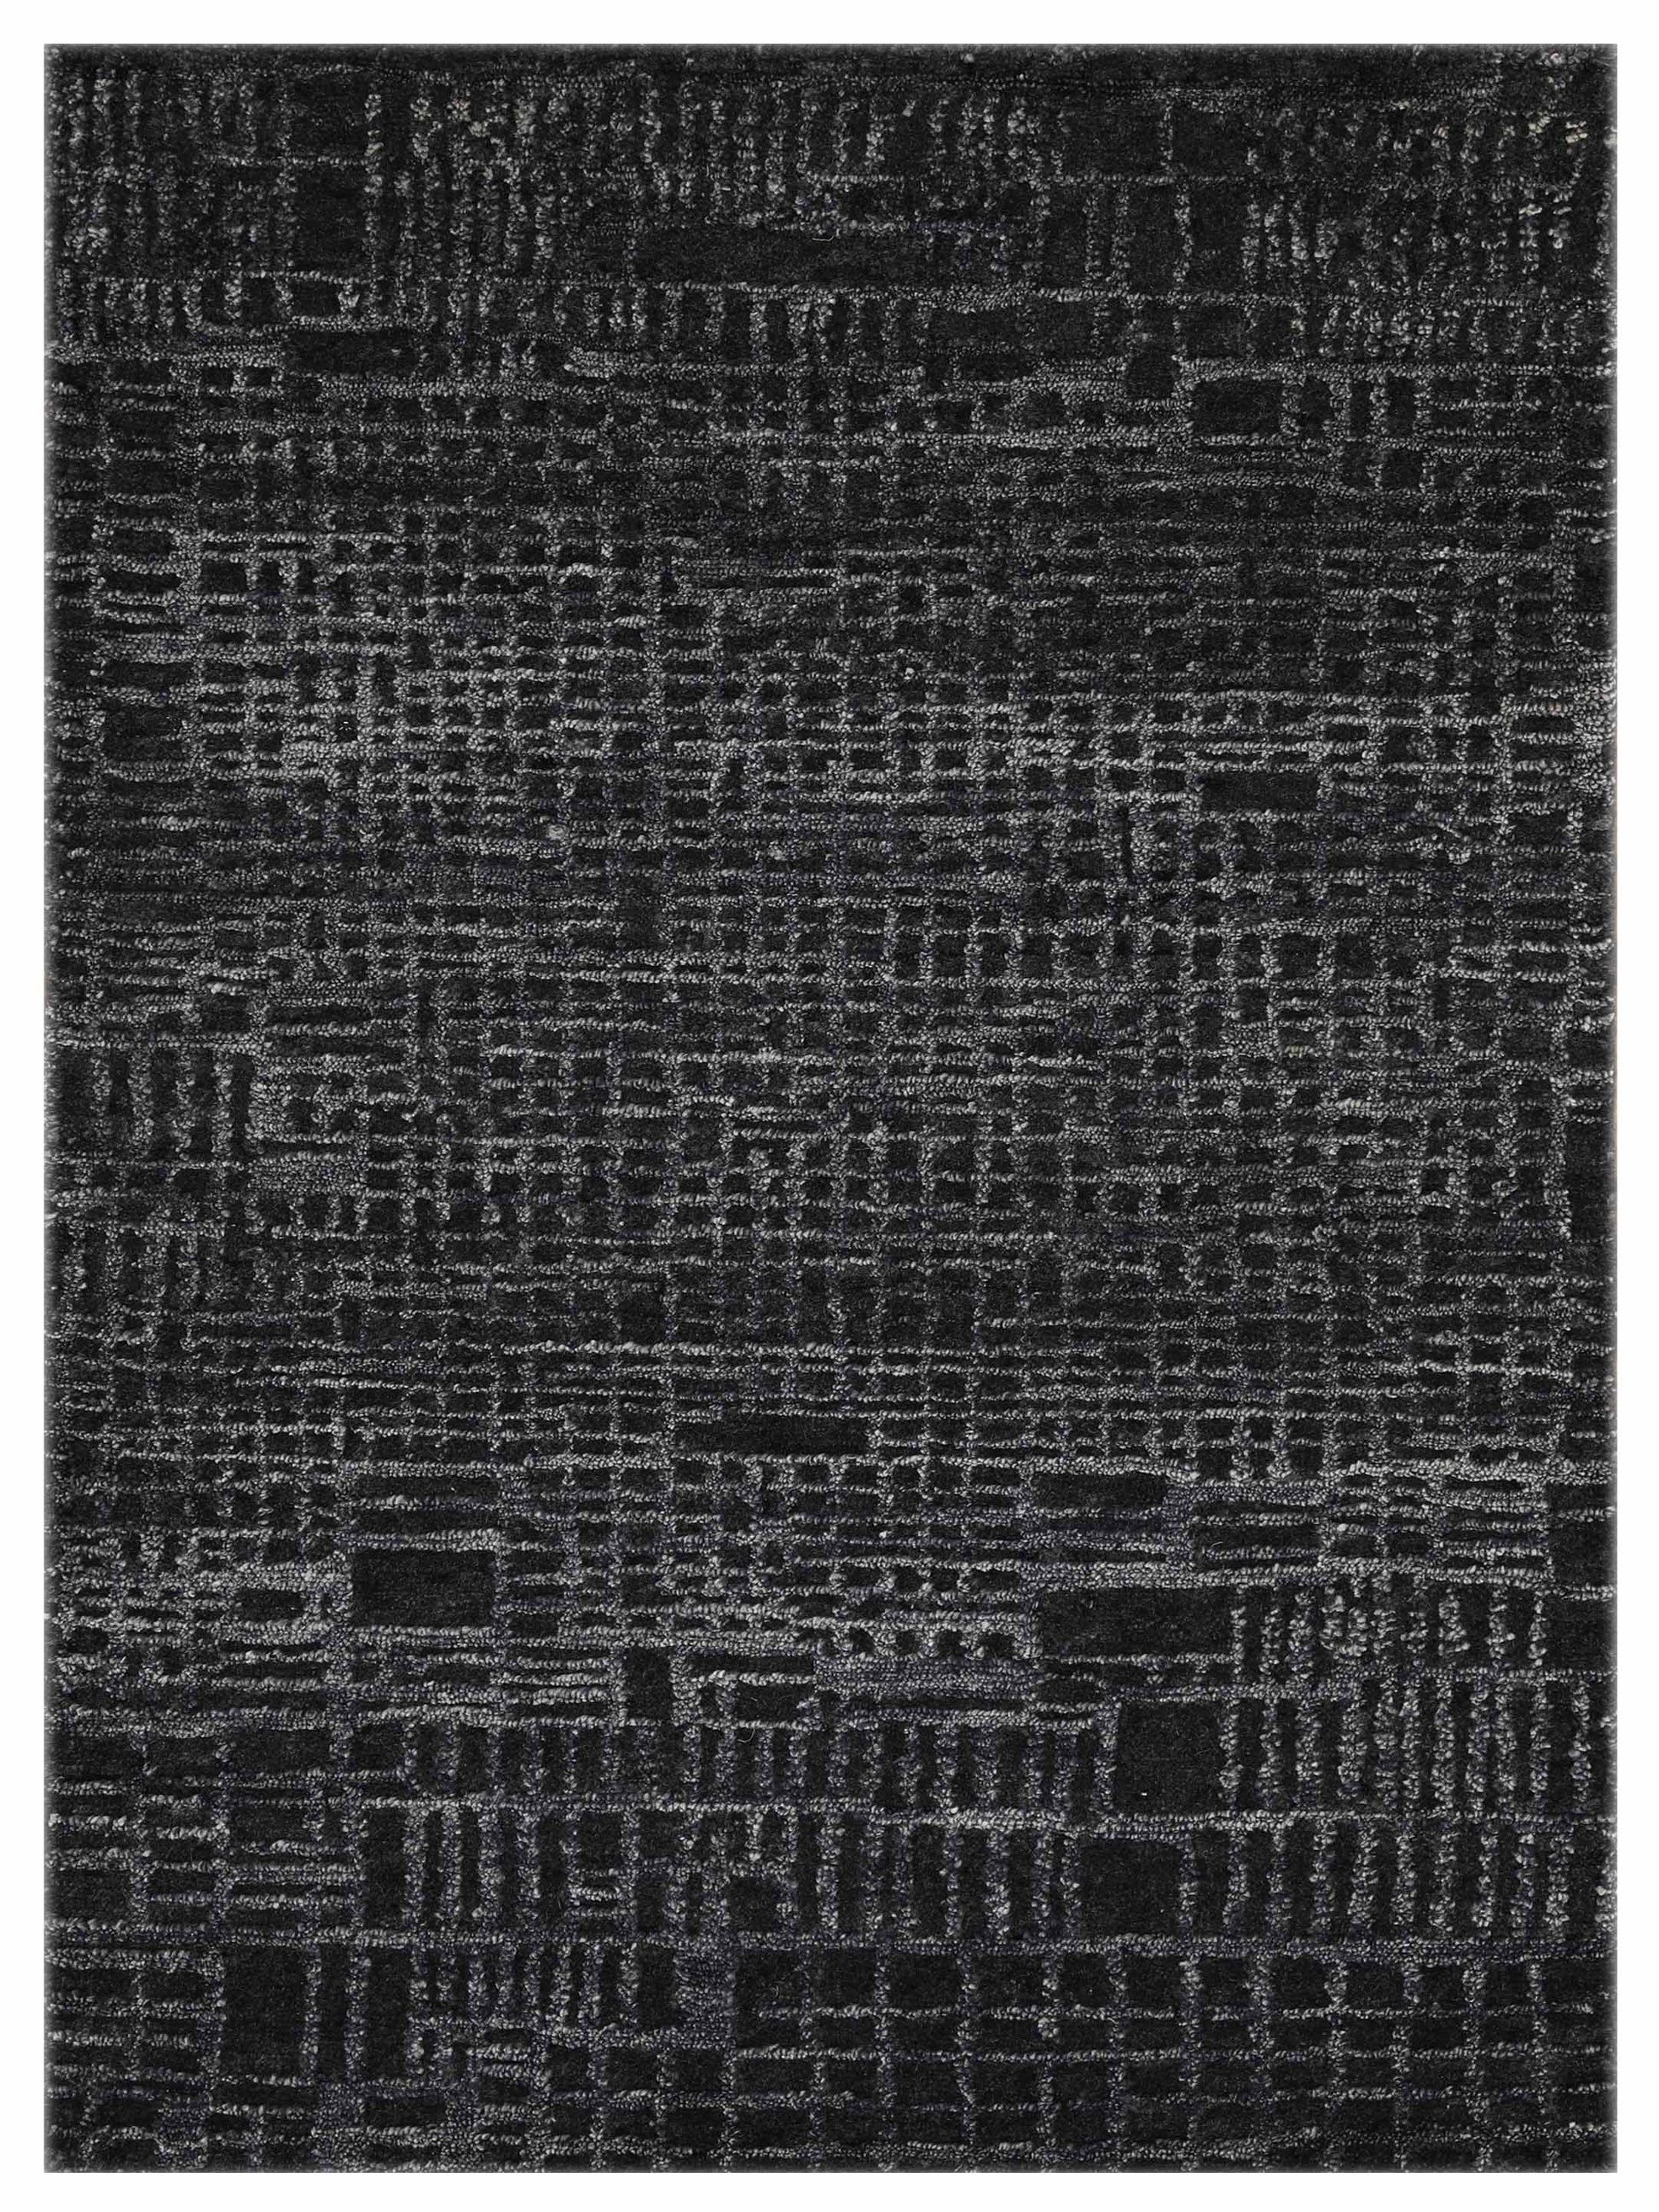 Artisan Mary MN-397 Washed Black Contemporary Knotted Rug